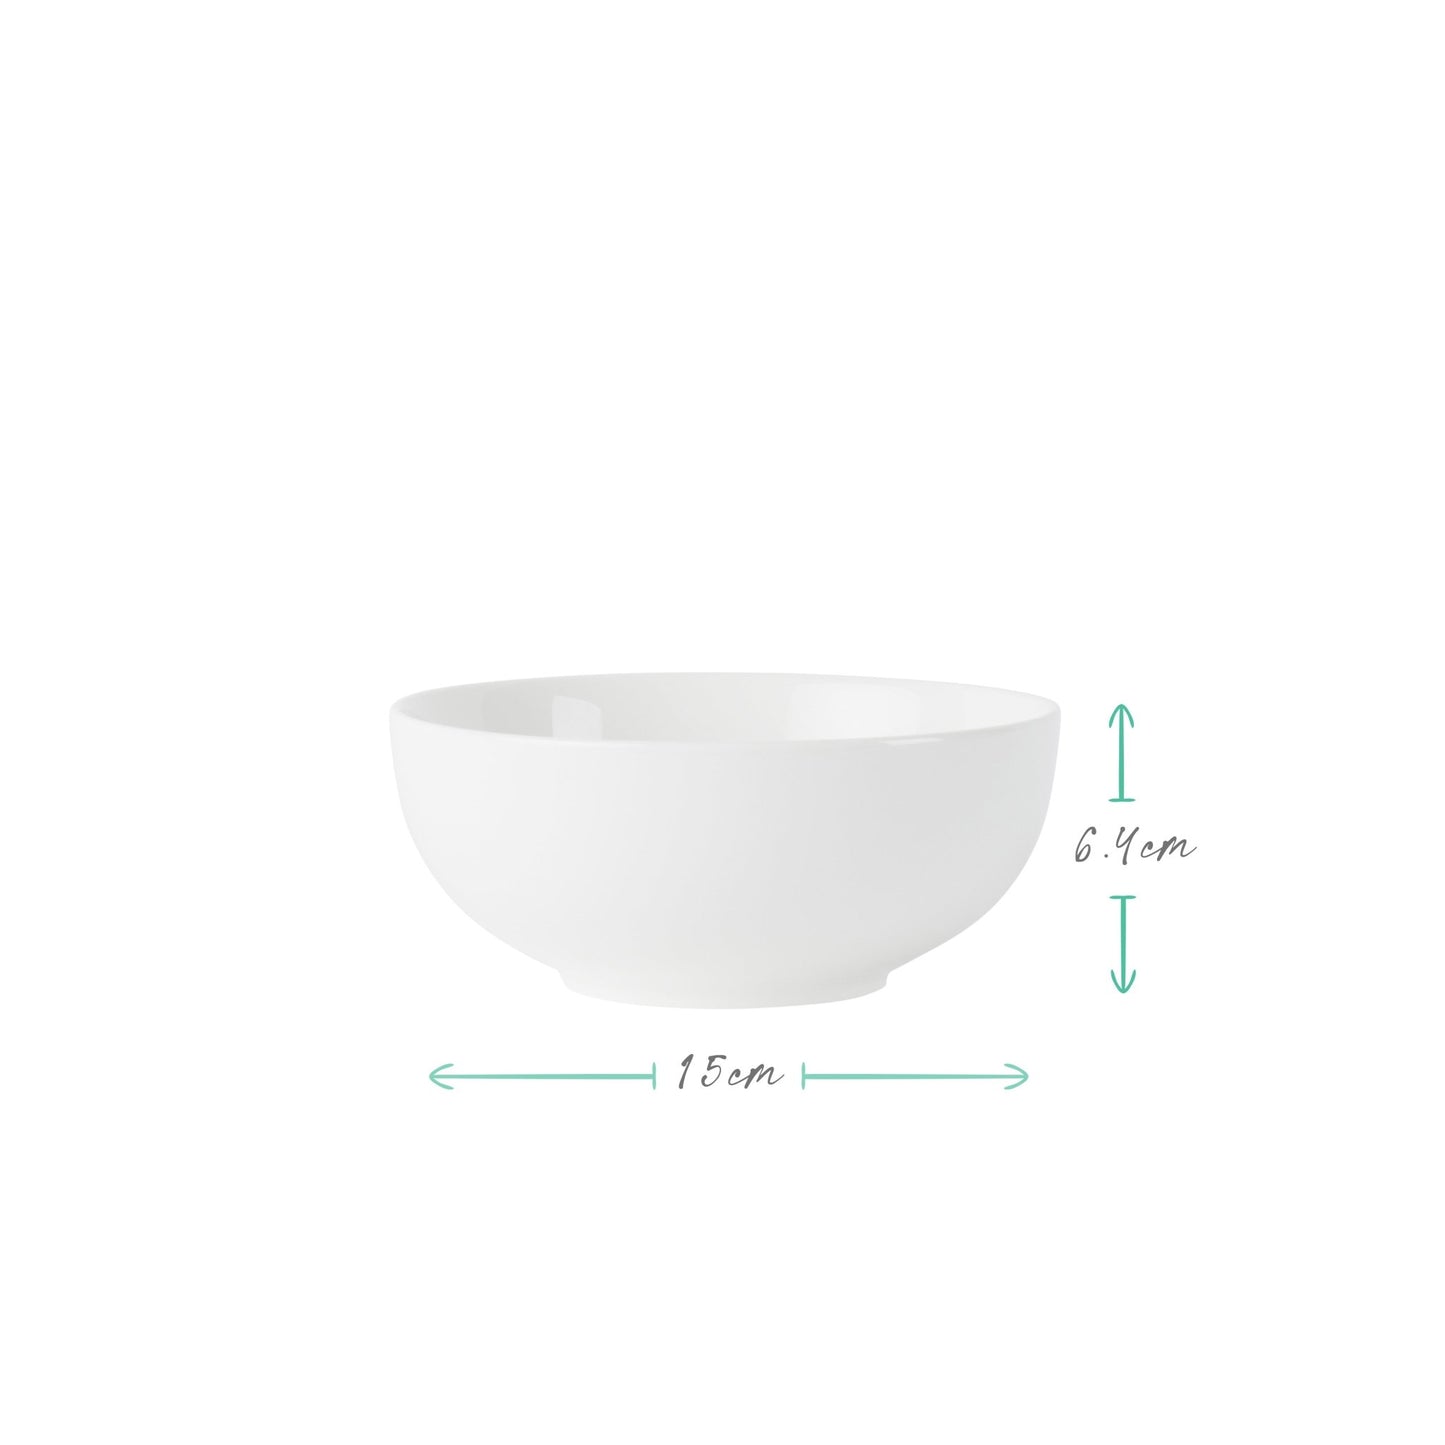 White Bone China Dinner Set 'Coupe' (12 Pieces) - Anders & White